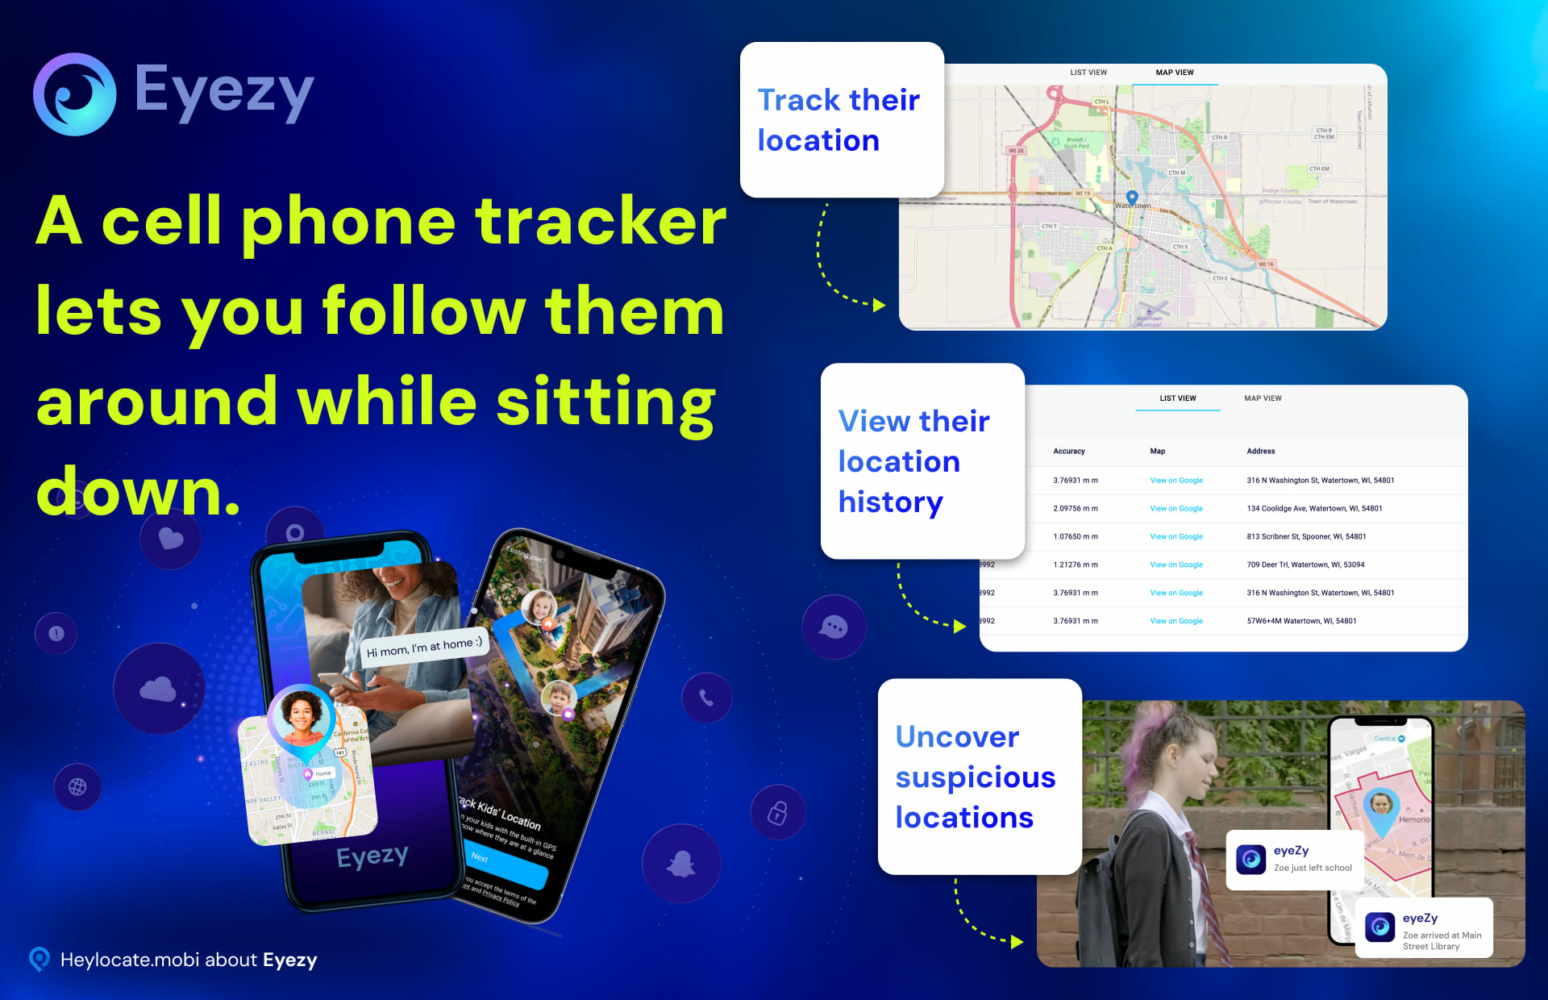 Eyezy demonstrating the cell phone tracker feature, with visuals of tracking someone's location, viewing location history, and uncovering suspicious locations on a map interface.